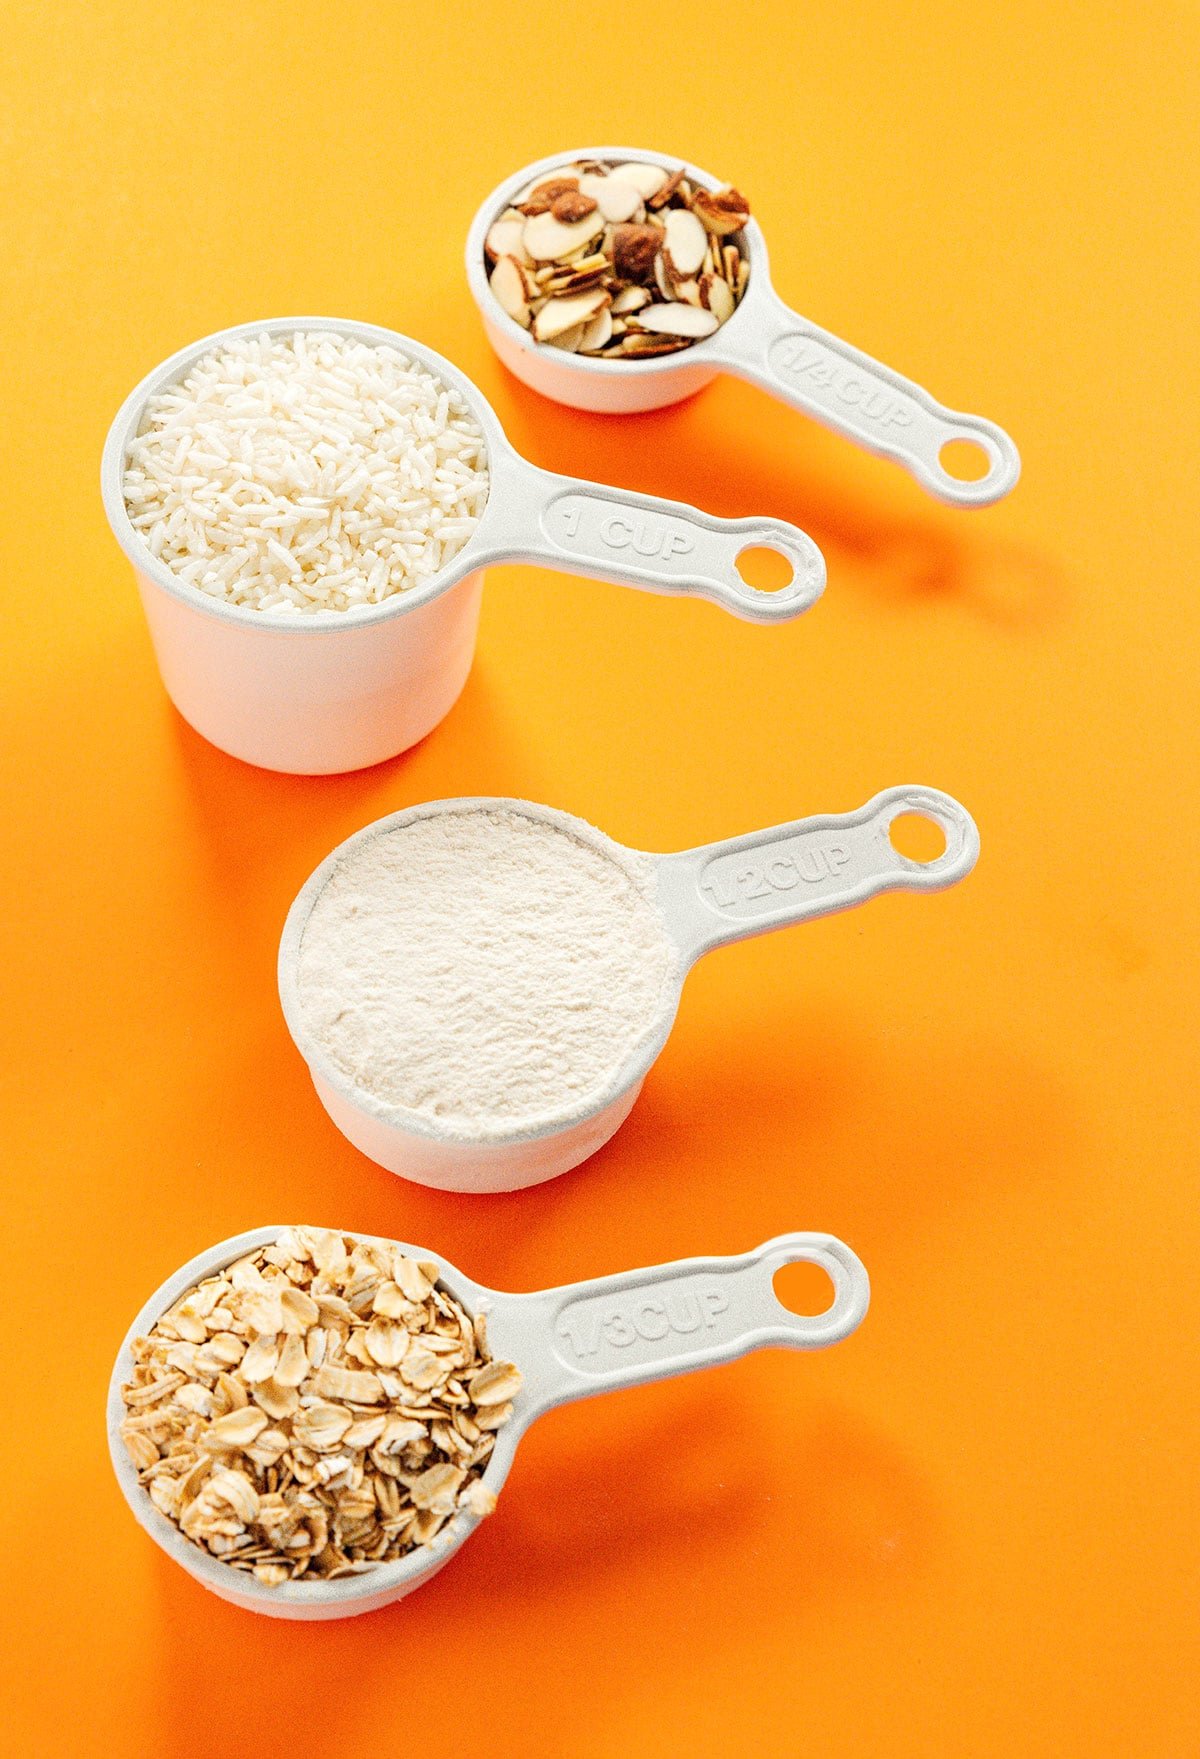 Solid measuring cups with oats, flour, and rice in them.